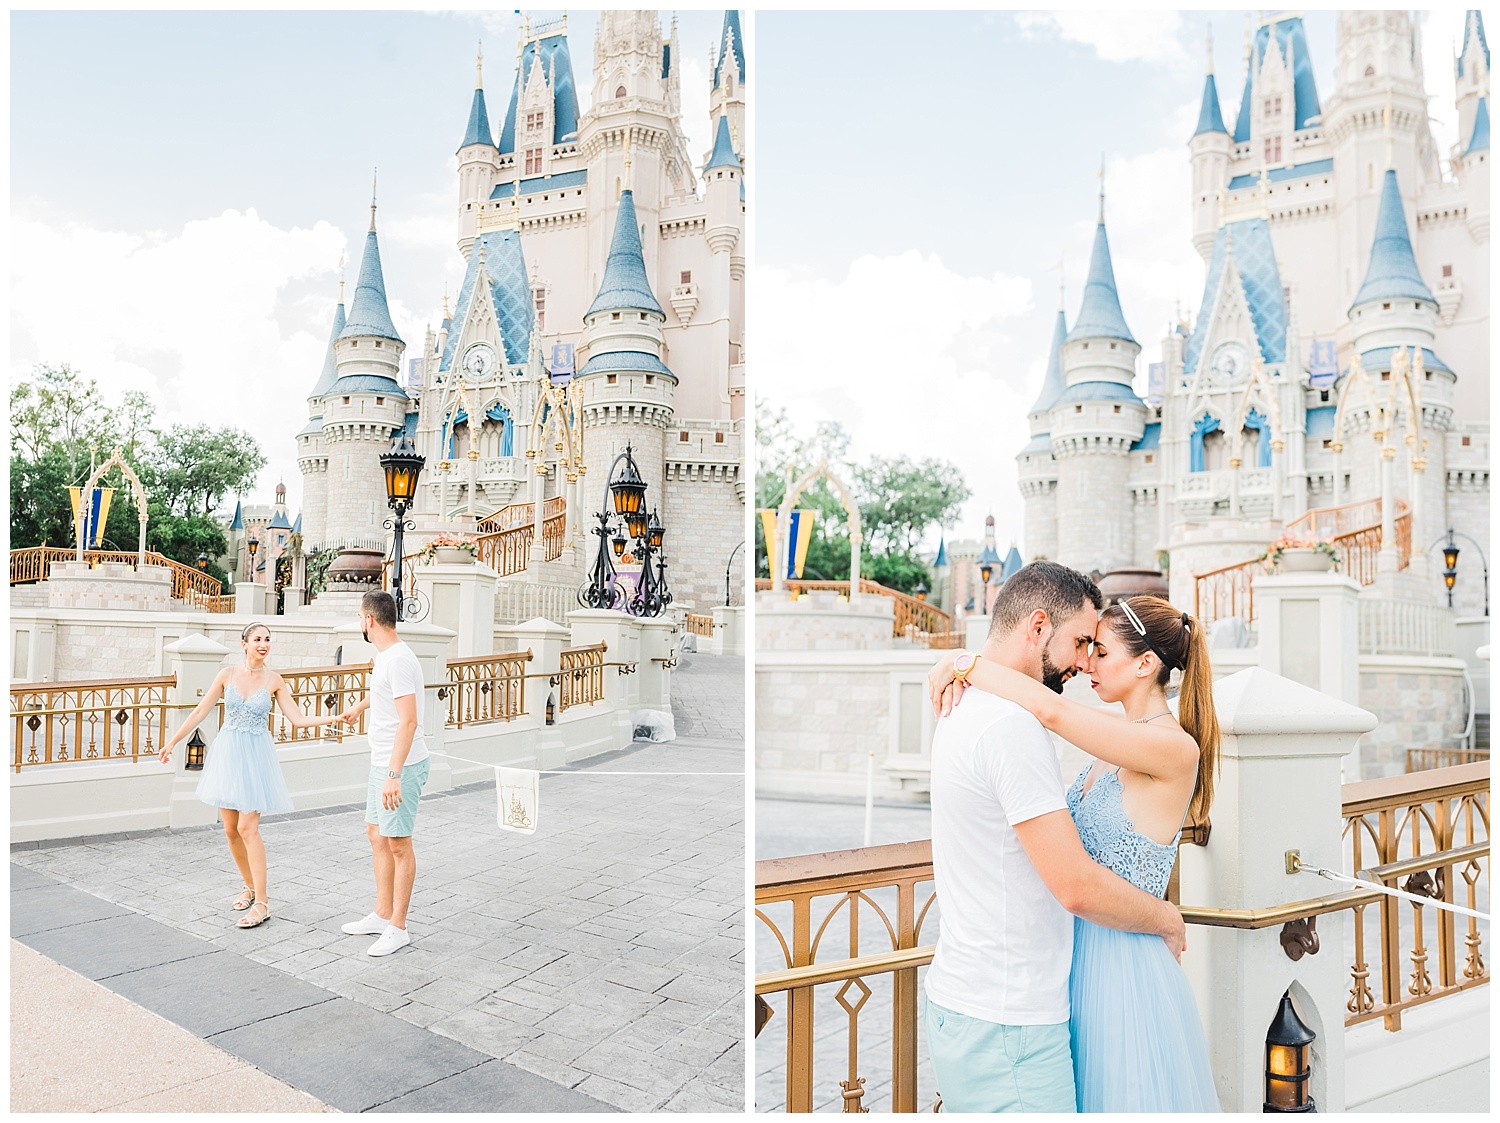 Couple in front of Cinderella’s Castle